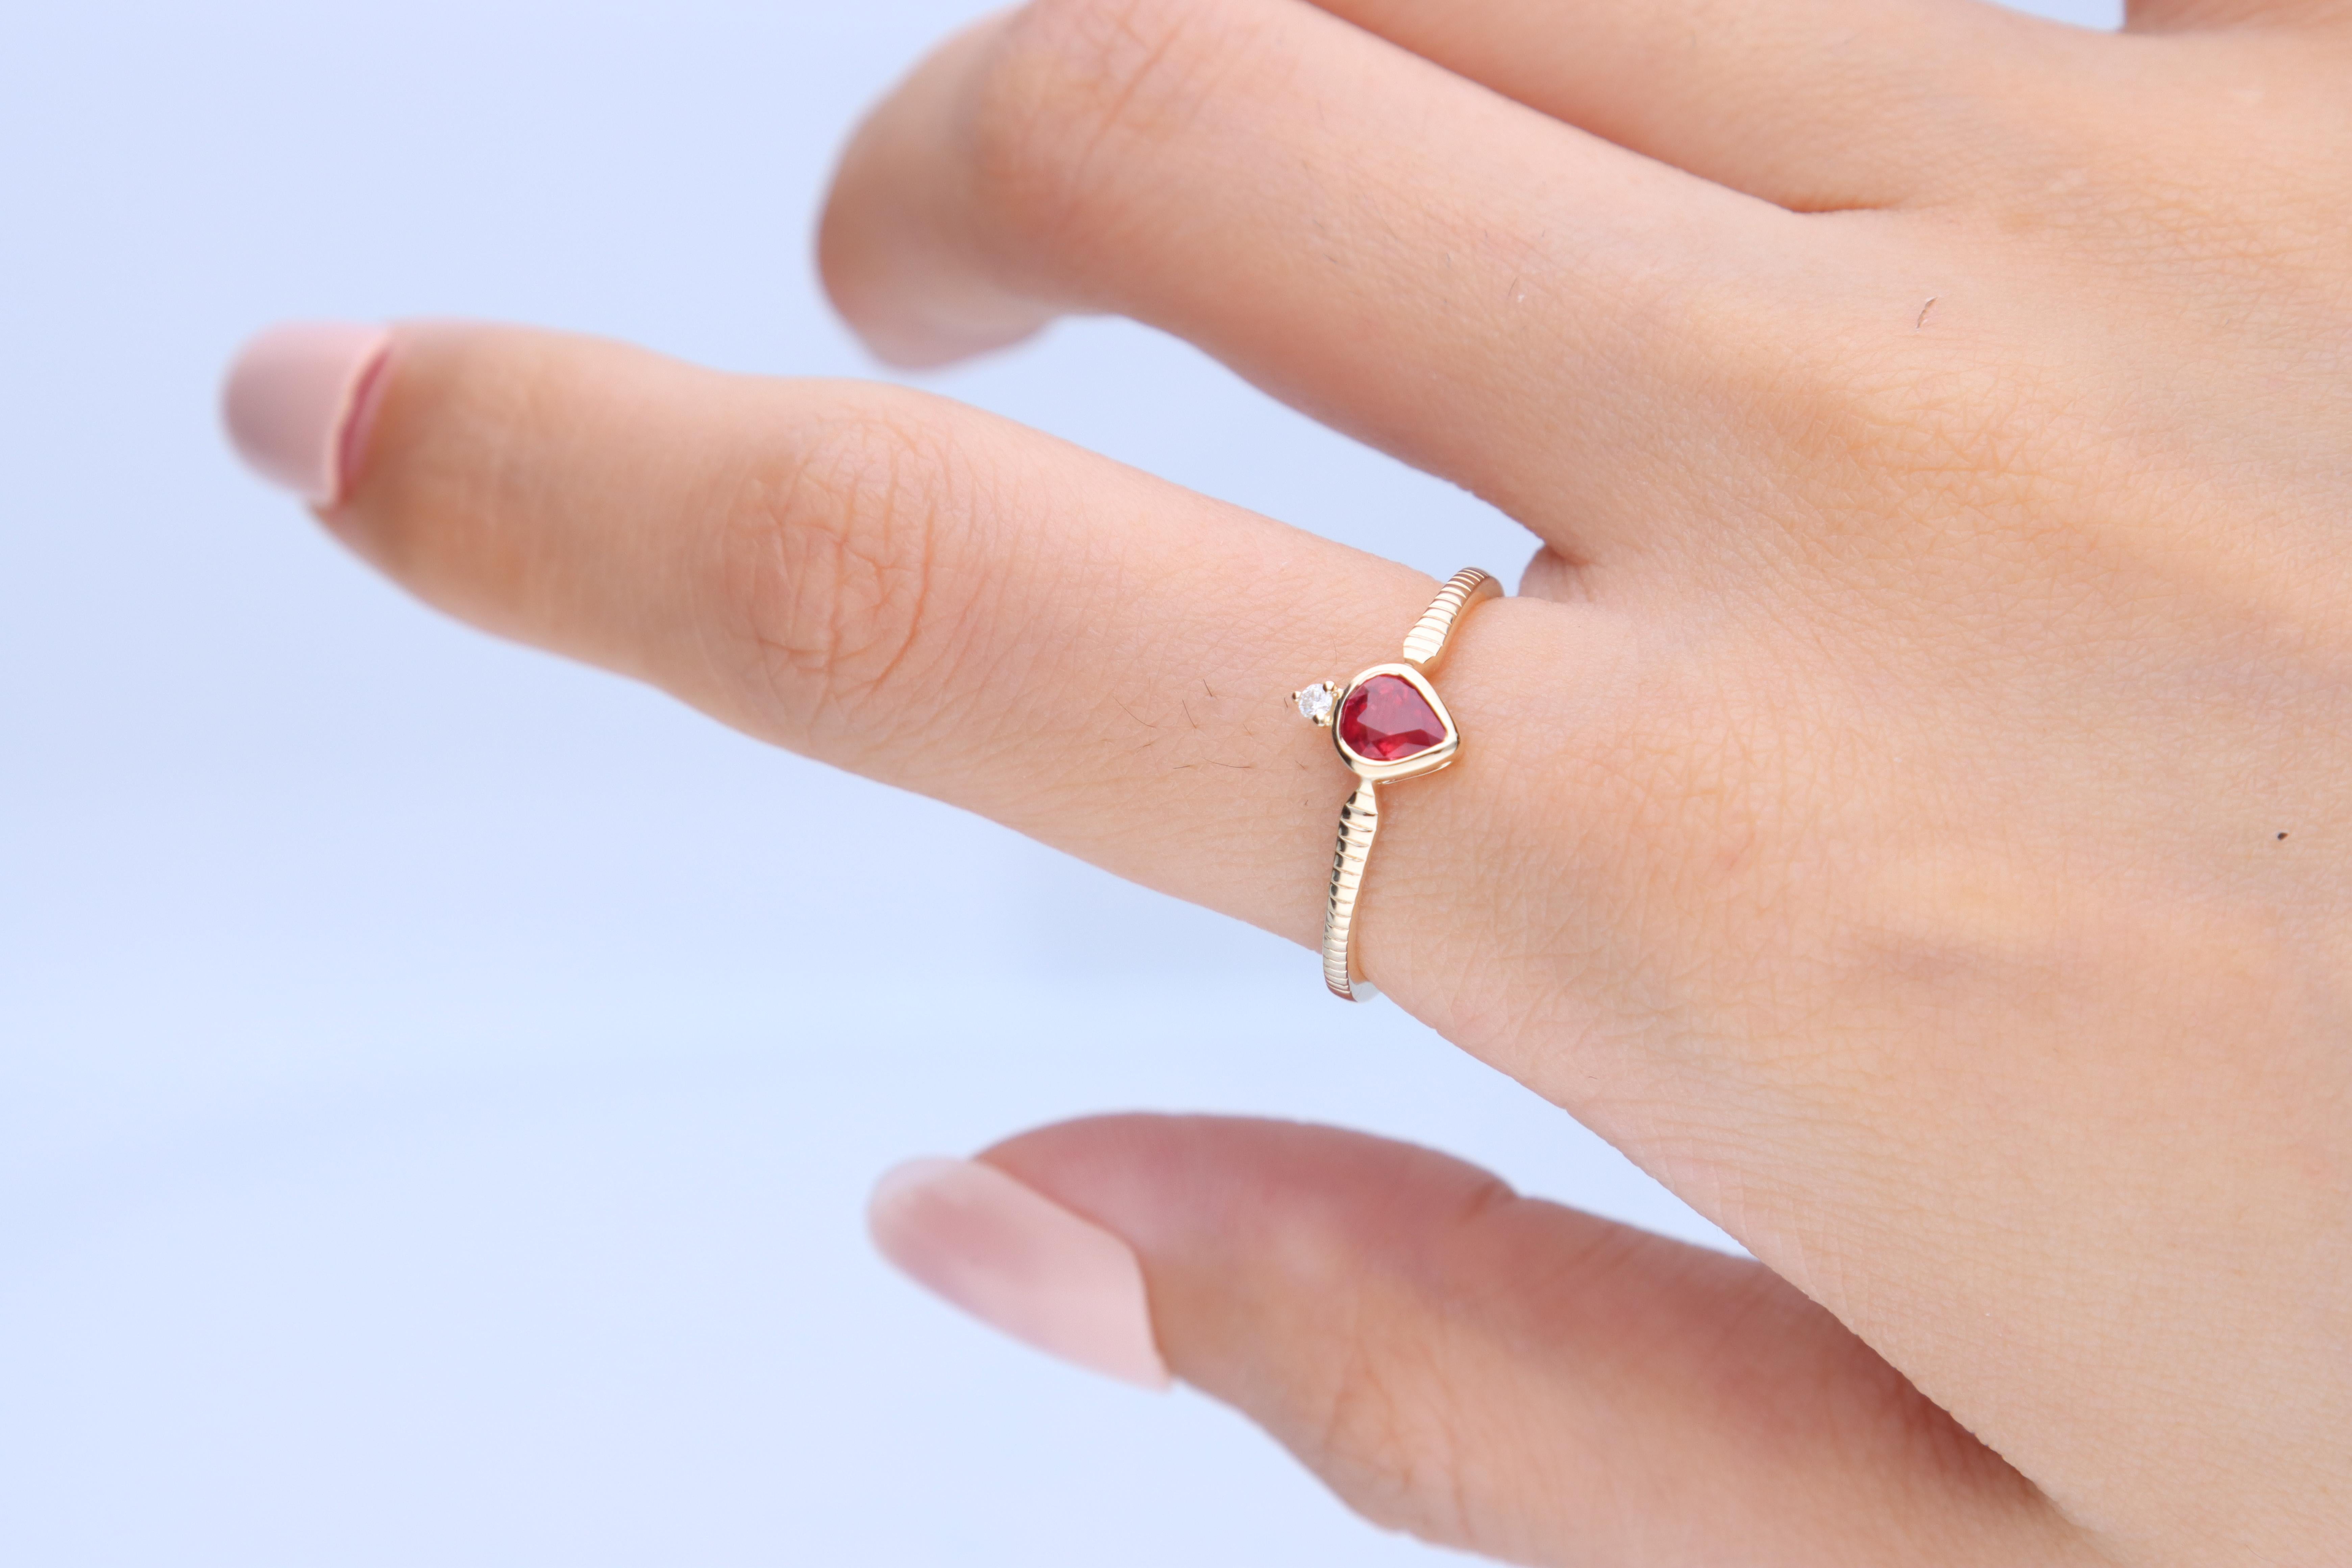 Stunning, timeless and classy eternity Unique ring. Decorate yourself in luxury with this Gin & Grace ring. The 14k Yellow Gold jewelry boasts 5x4 Pear-cut Ruby (1 pcs) 0.36 Carat and Round-Cut Diamond (1 pcs) 0.02 Carat accent stones for a lovely